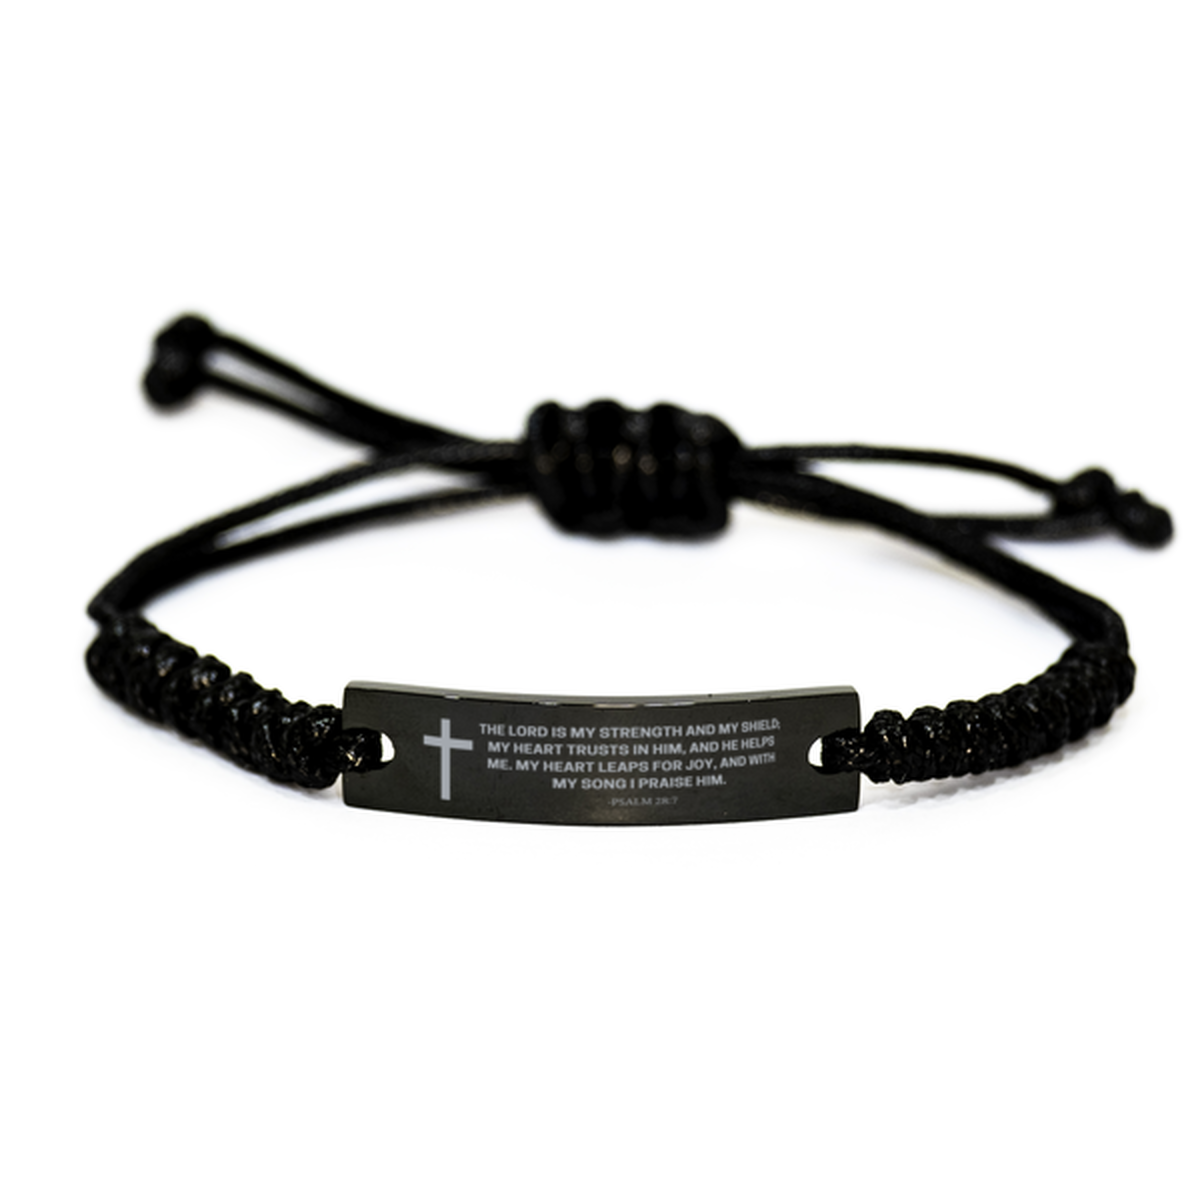 Baptism Gifts For Teenage Boys Girls, Christian Bible Verse Black Rope Bracelet, The Lord is my strength and my shield, Catholic Confirmation Gifts for Son, Godson, Grandson, Nephew